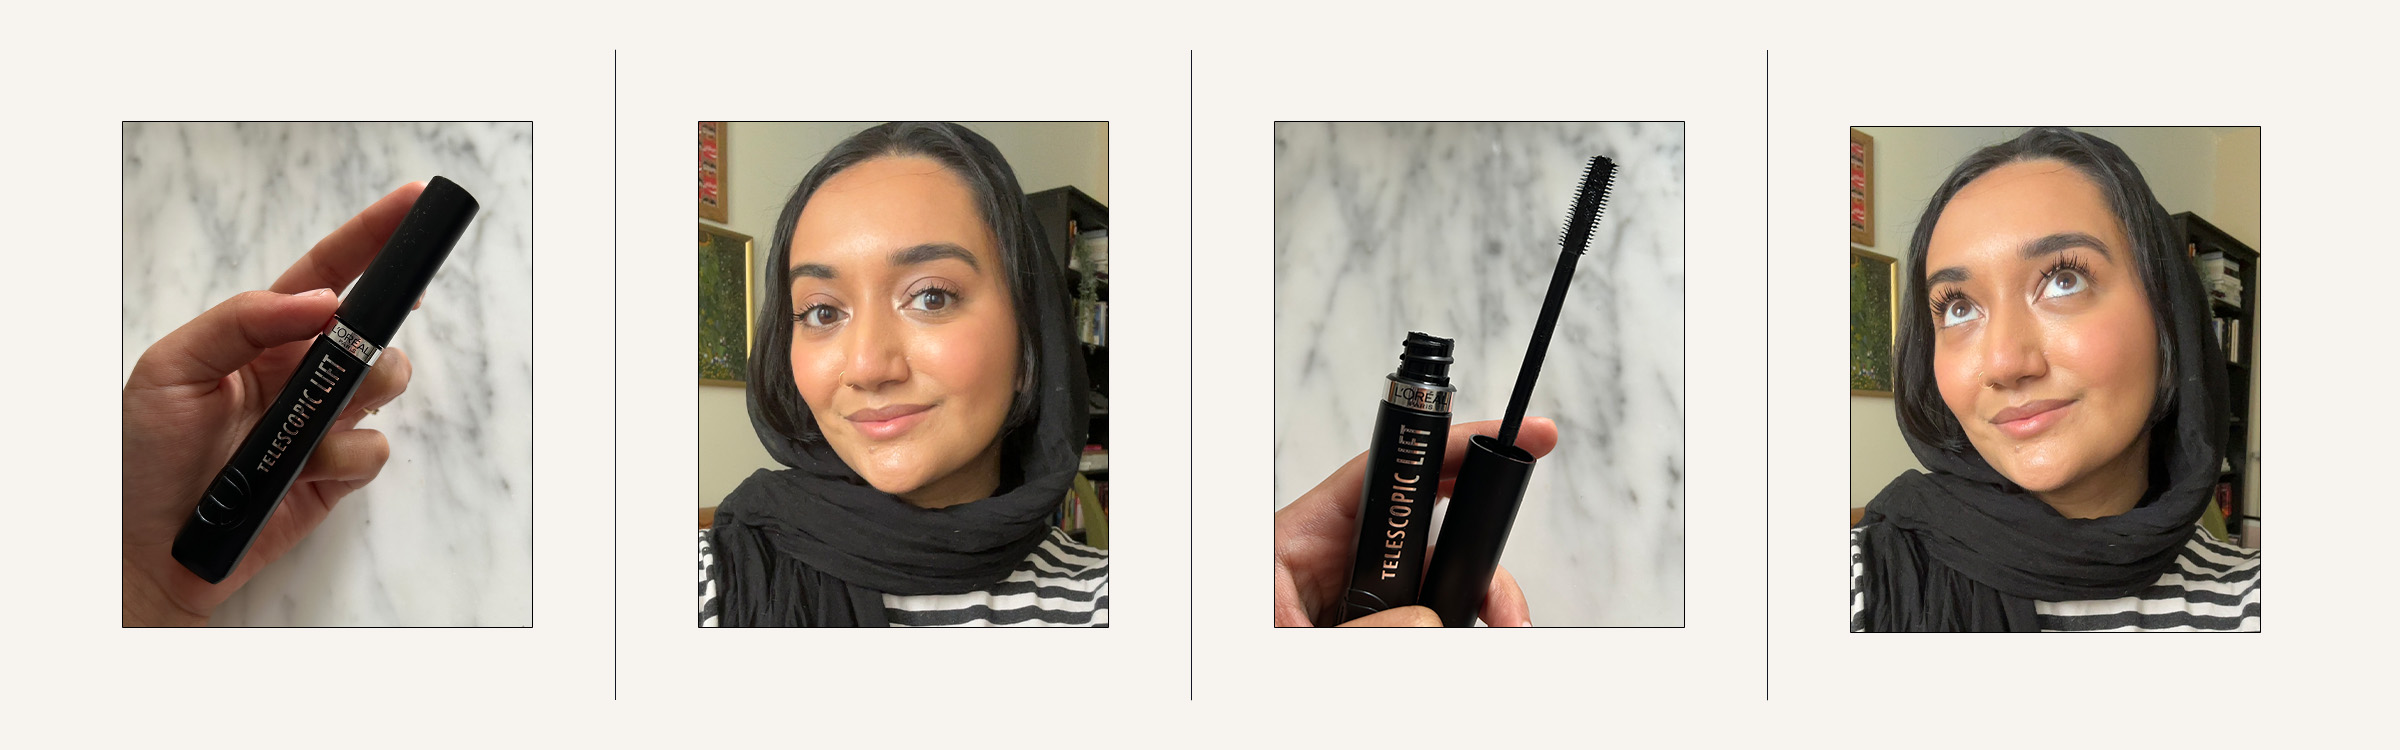 This Drugstore Mascara Started a TikTok Controversy, so I Had to Try It